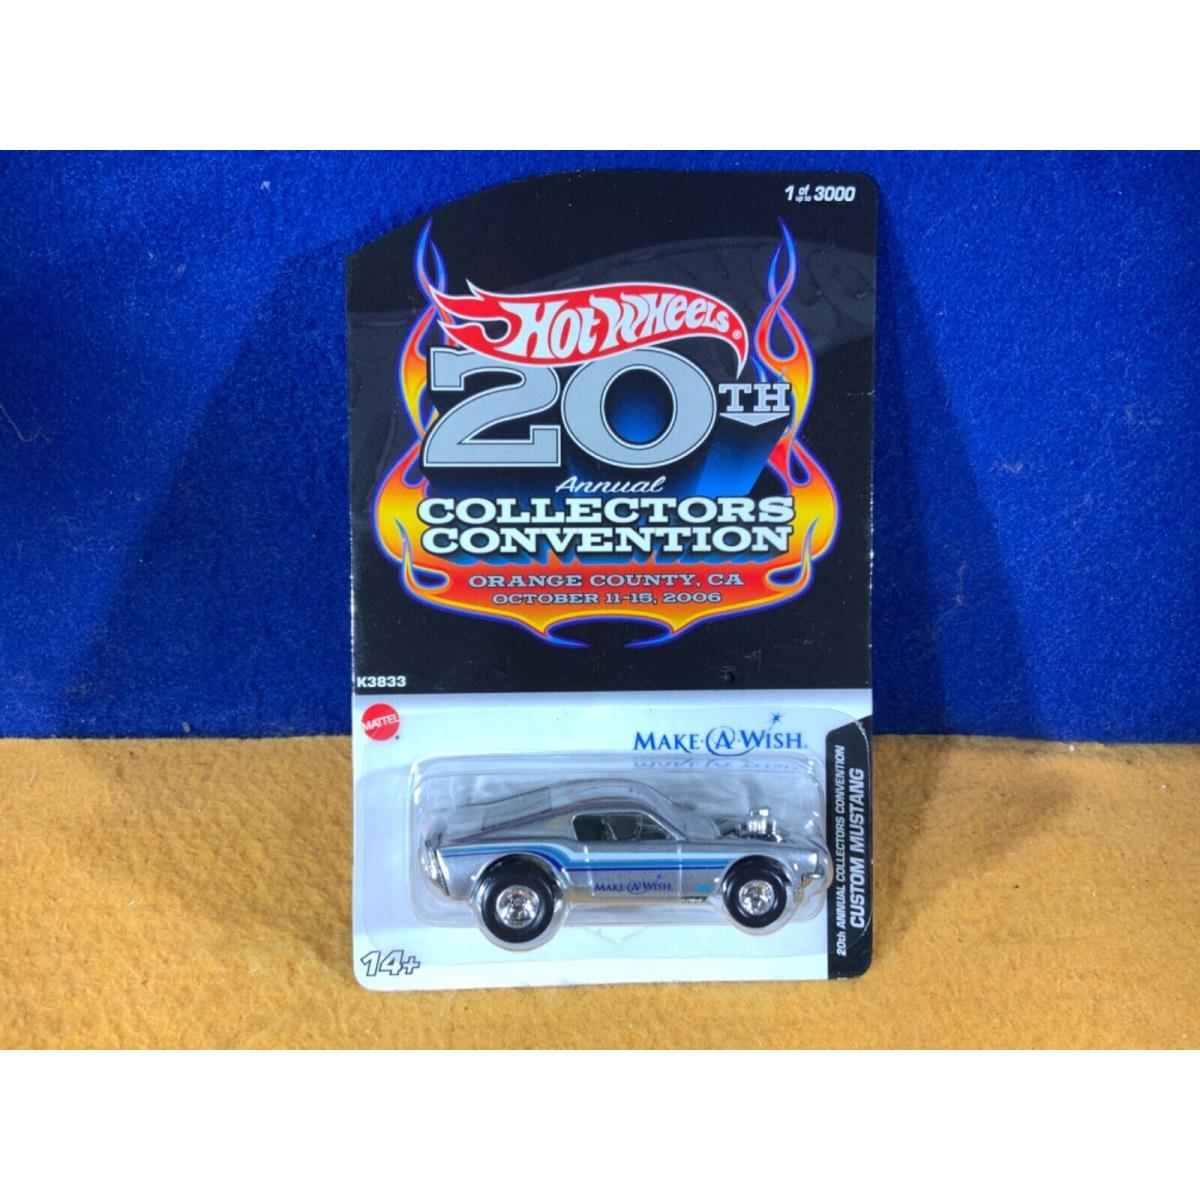 P9-45 Hot Wheels 20th Collectors Convention - Custom Mustang - 2006 -make A Wish